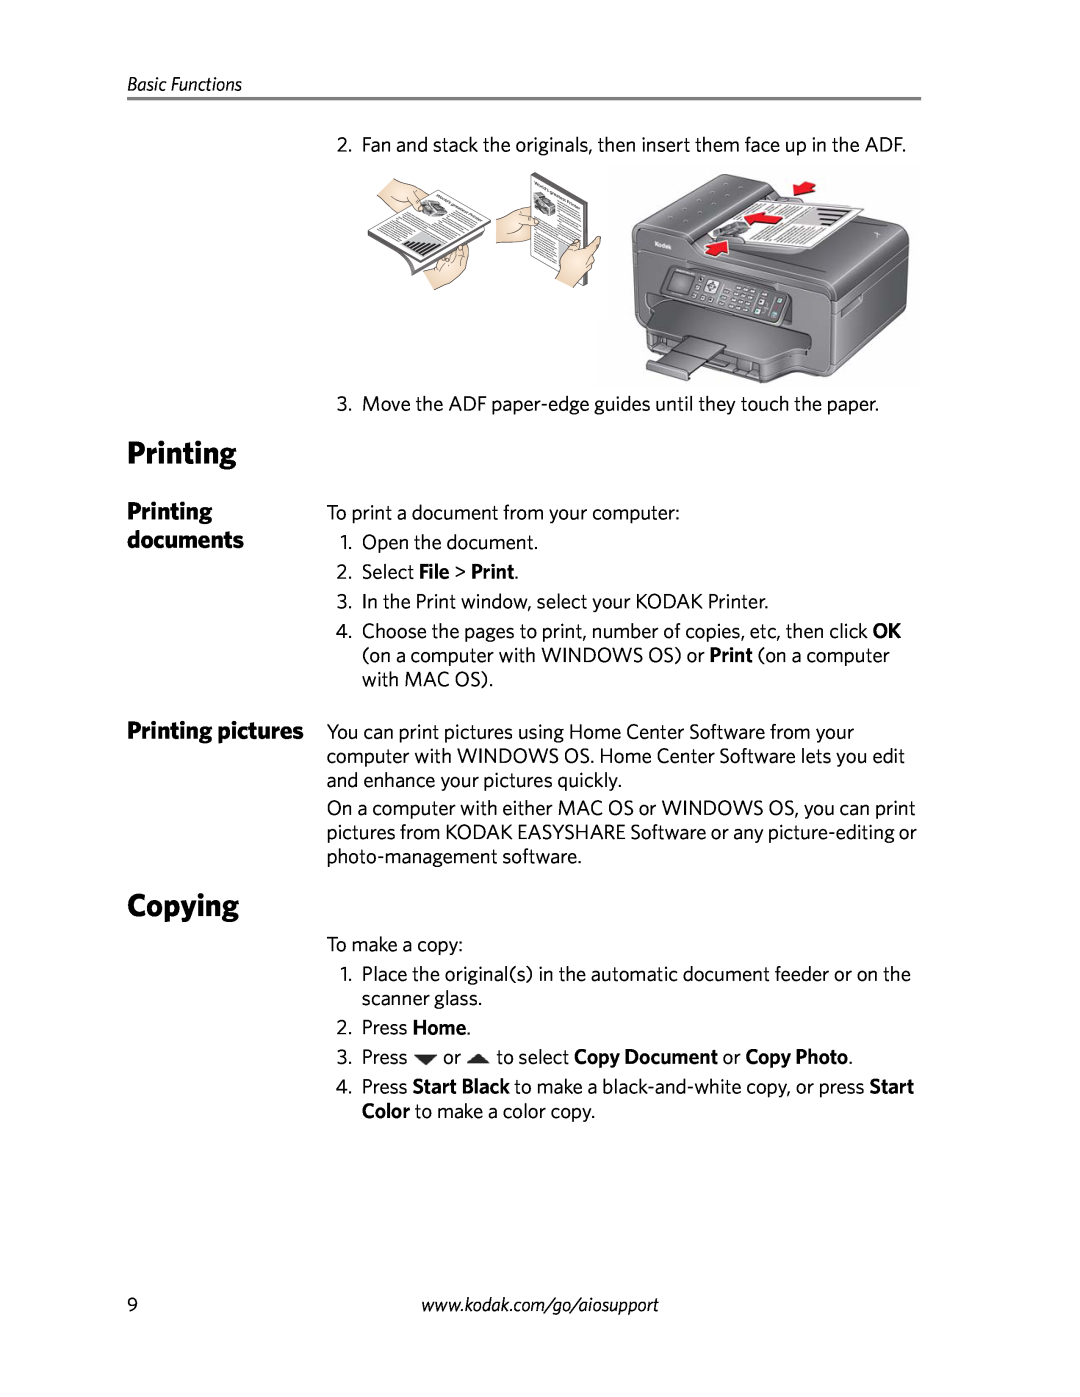 Kodak 6100 Series manual Printing, Copying, documents, Press or to select Copy Document or Copy Photo 